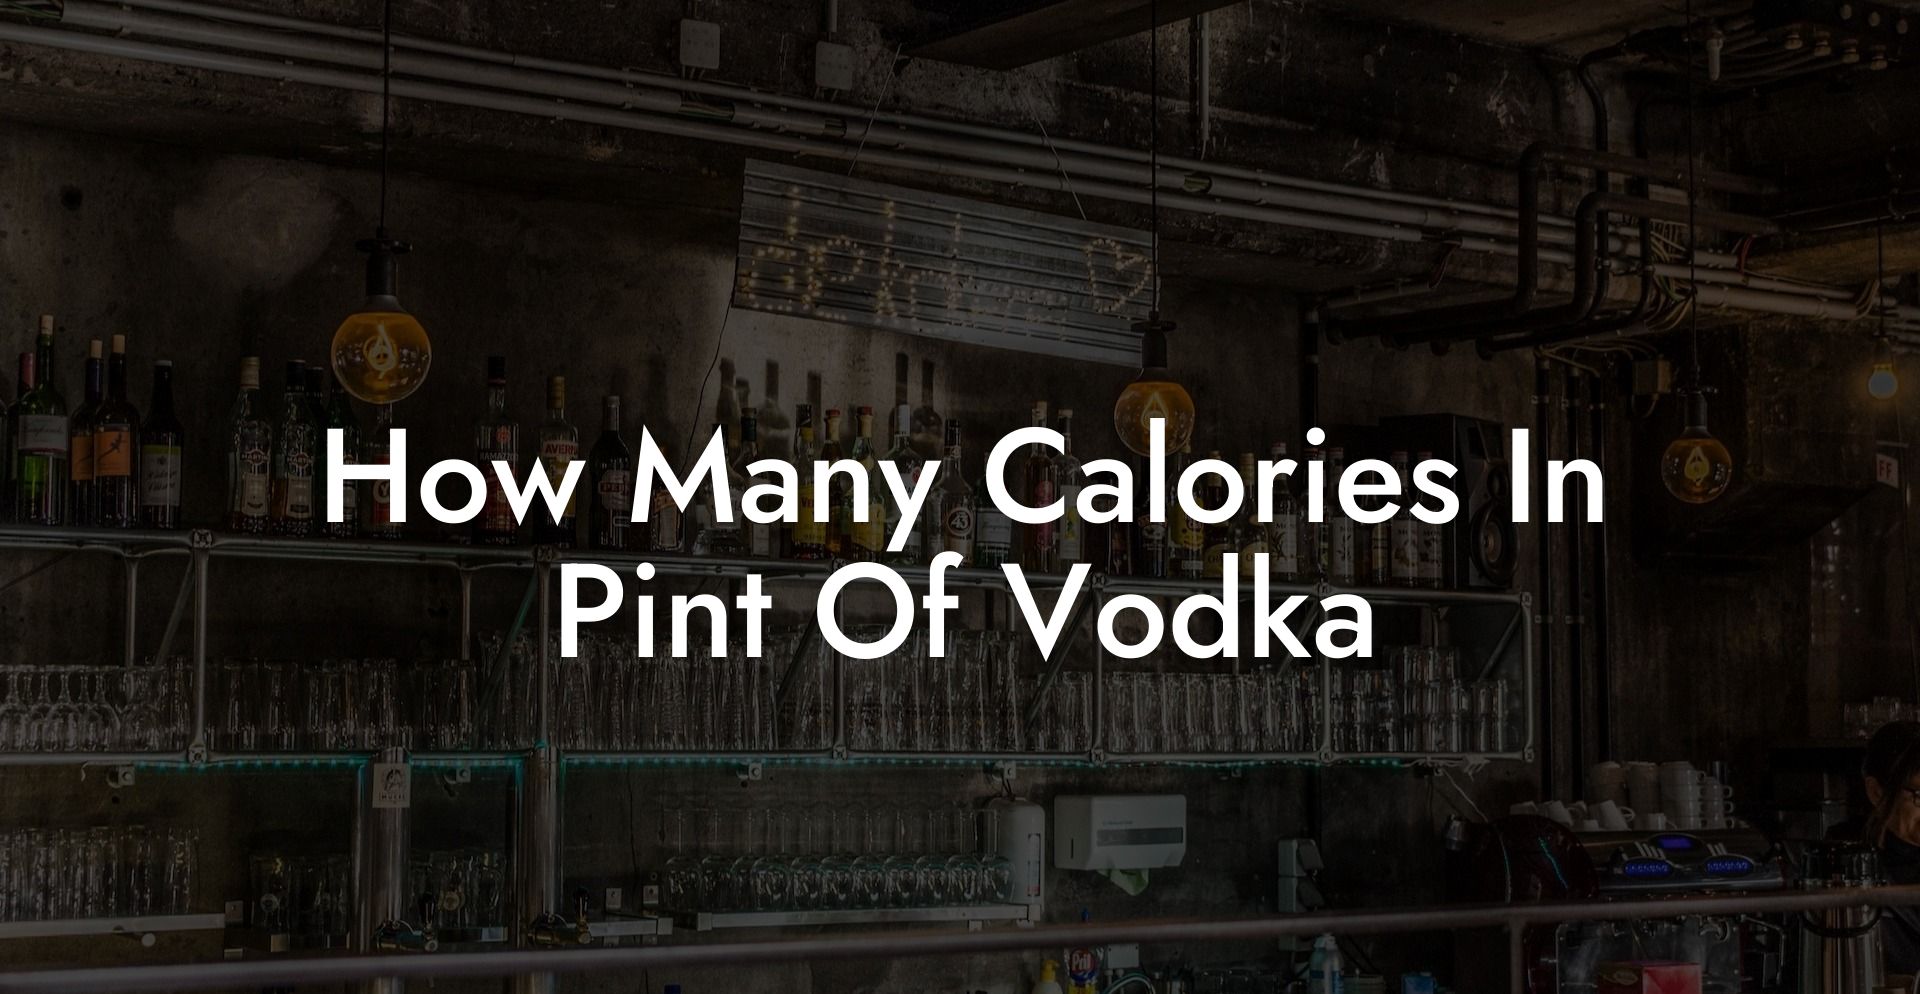 How Many Calories In Pint Of Vodka